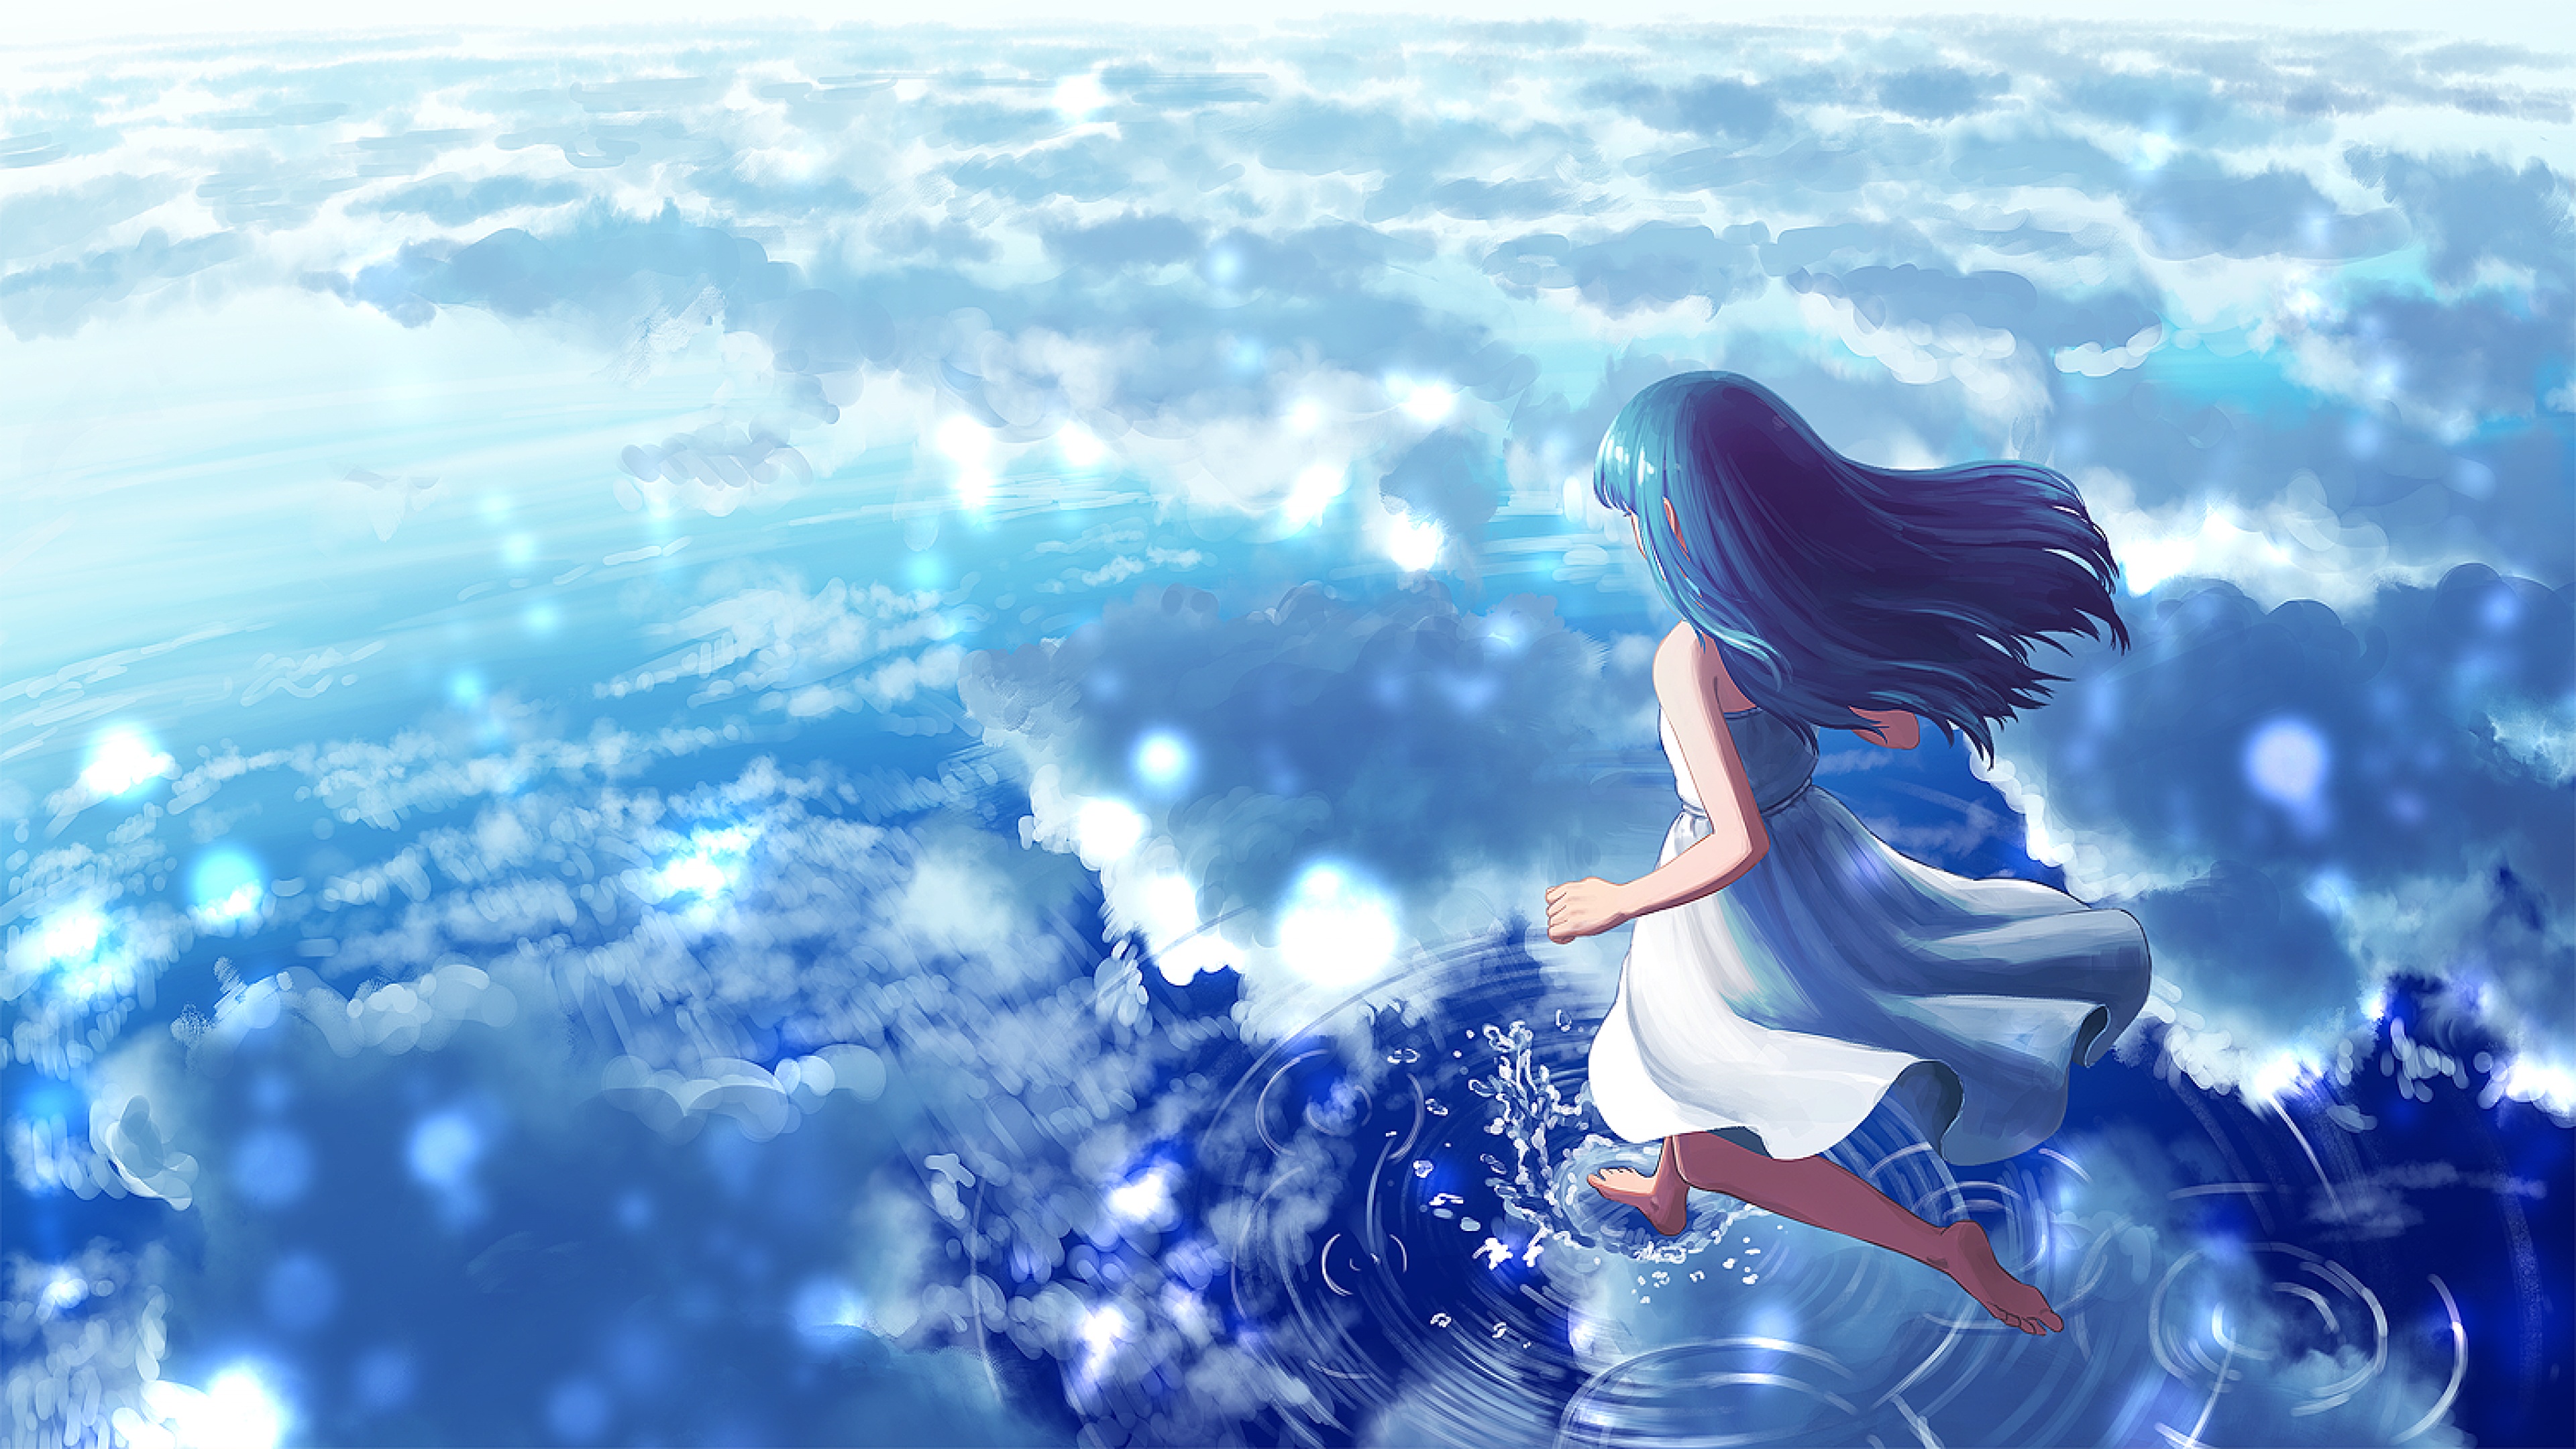 Anime Girl And Water background wallpaper